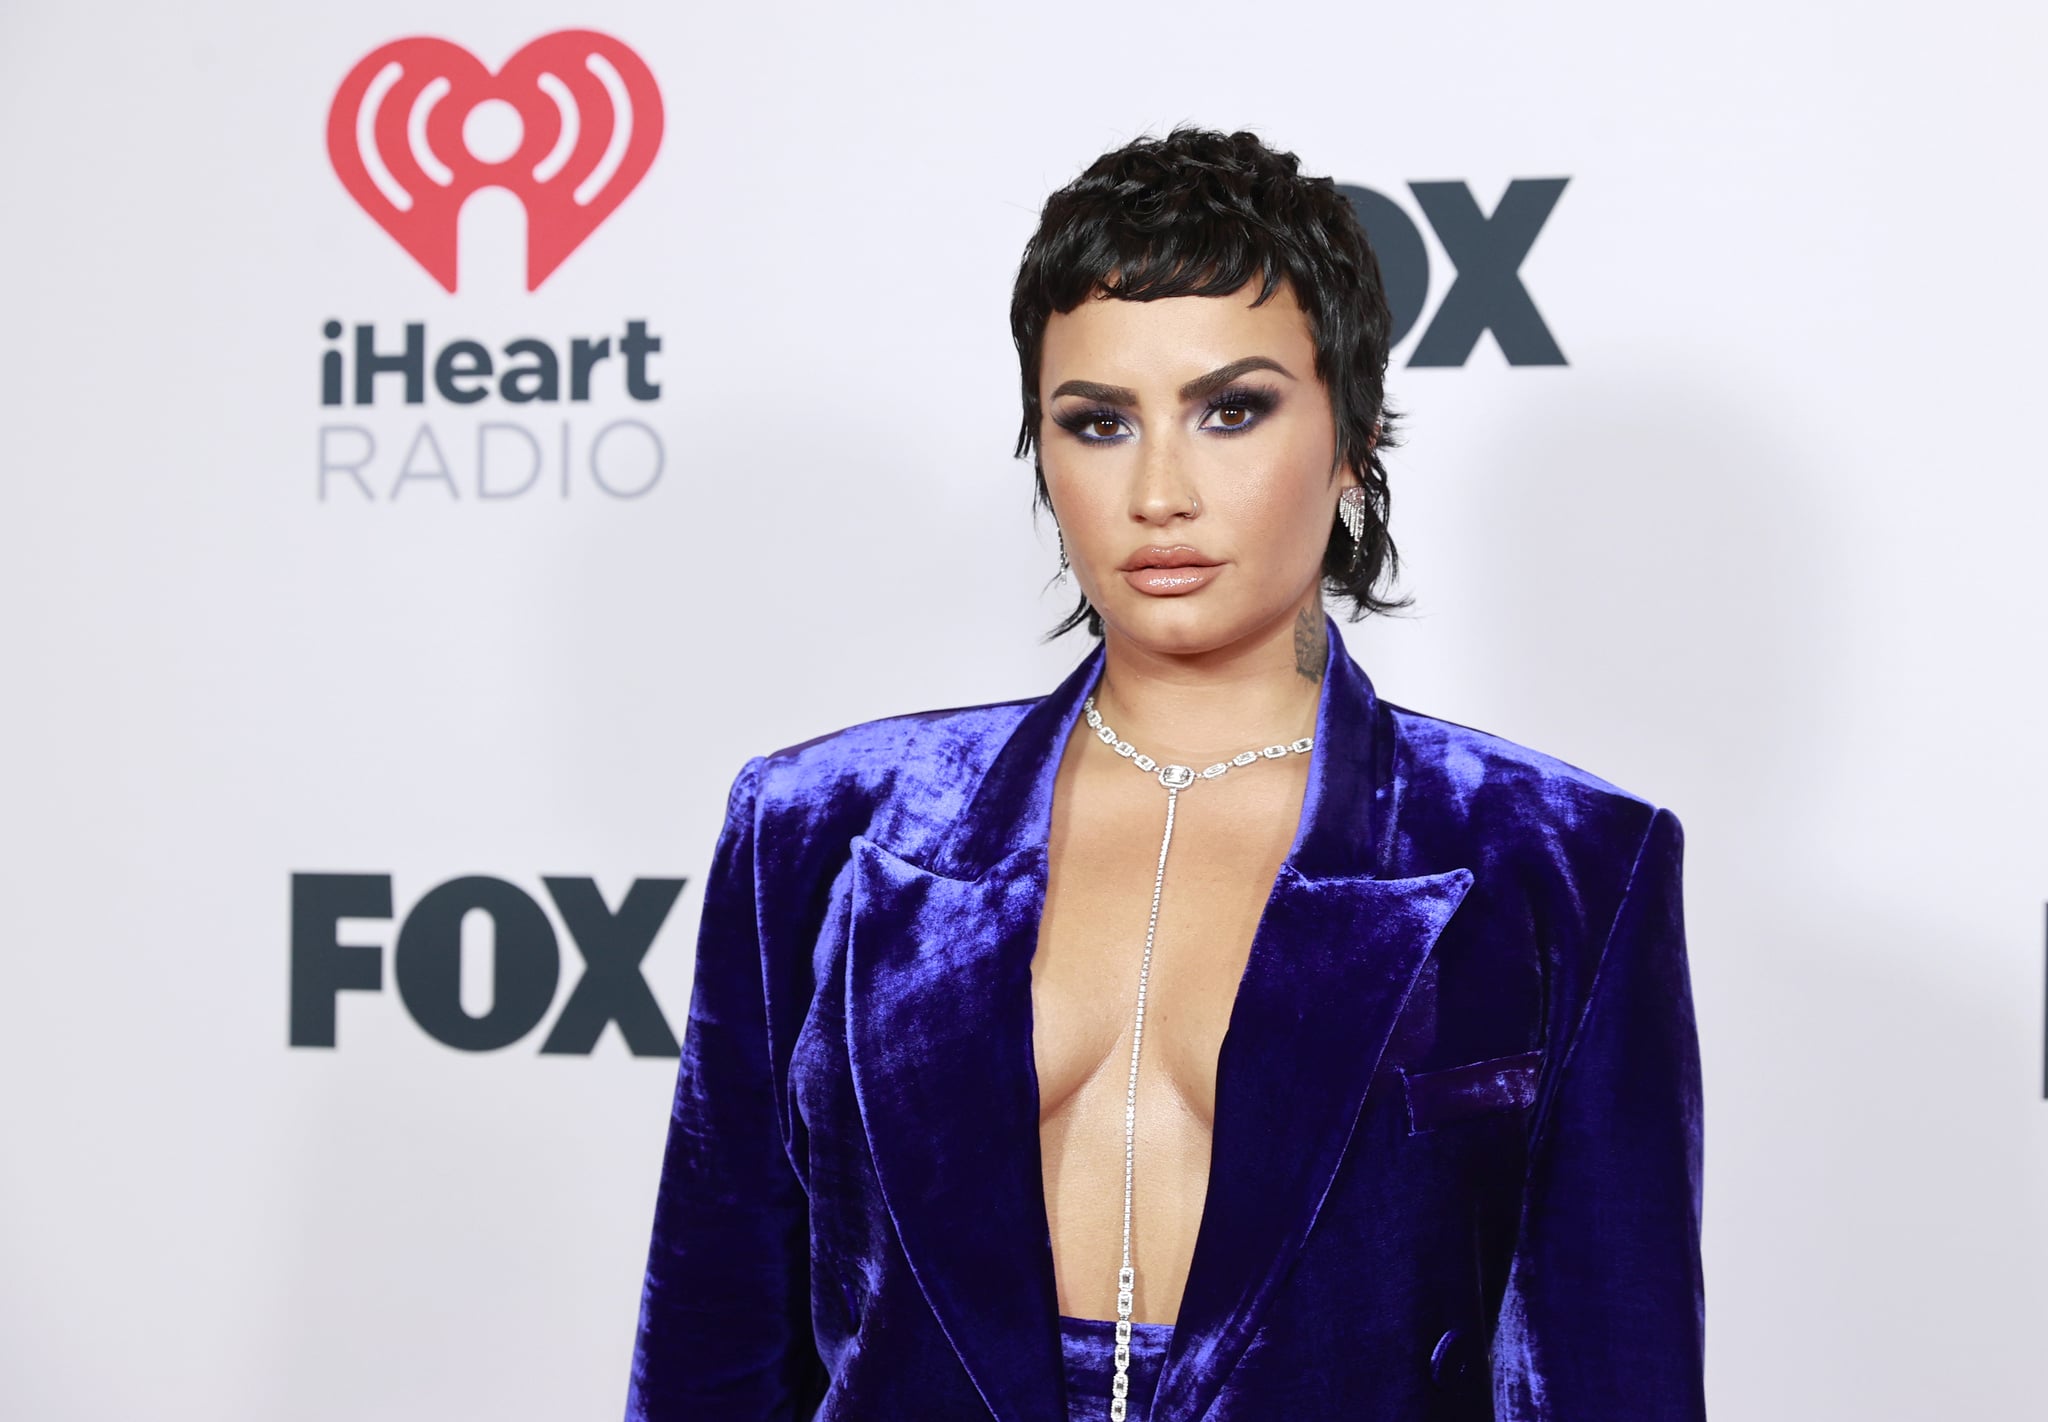 LOS ANGELES, CALIFORNIA - MAY 27: (EDITORIAL USE ONLY) Demi Lovato attends the 2021 iHeartRadio Music Awards at The Dolby Theatre in Los Angeles, California, which was broadcast live on FOX on May 27, 2021. (Photo by Emma McIntyre/Getty Images for iHeartMedia)